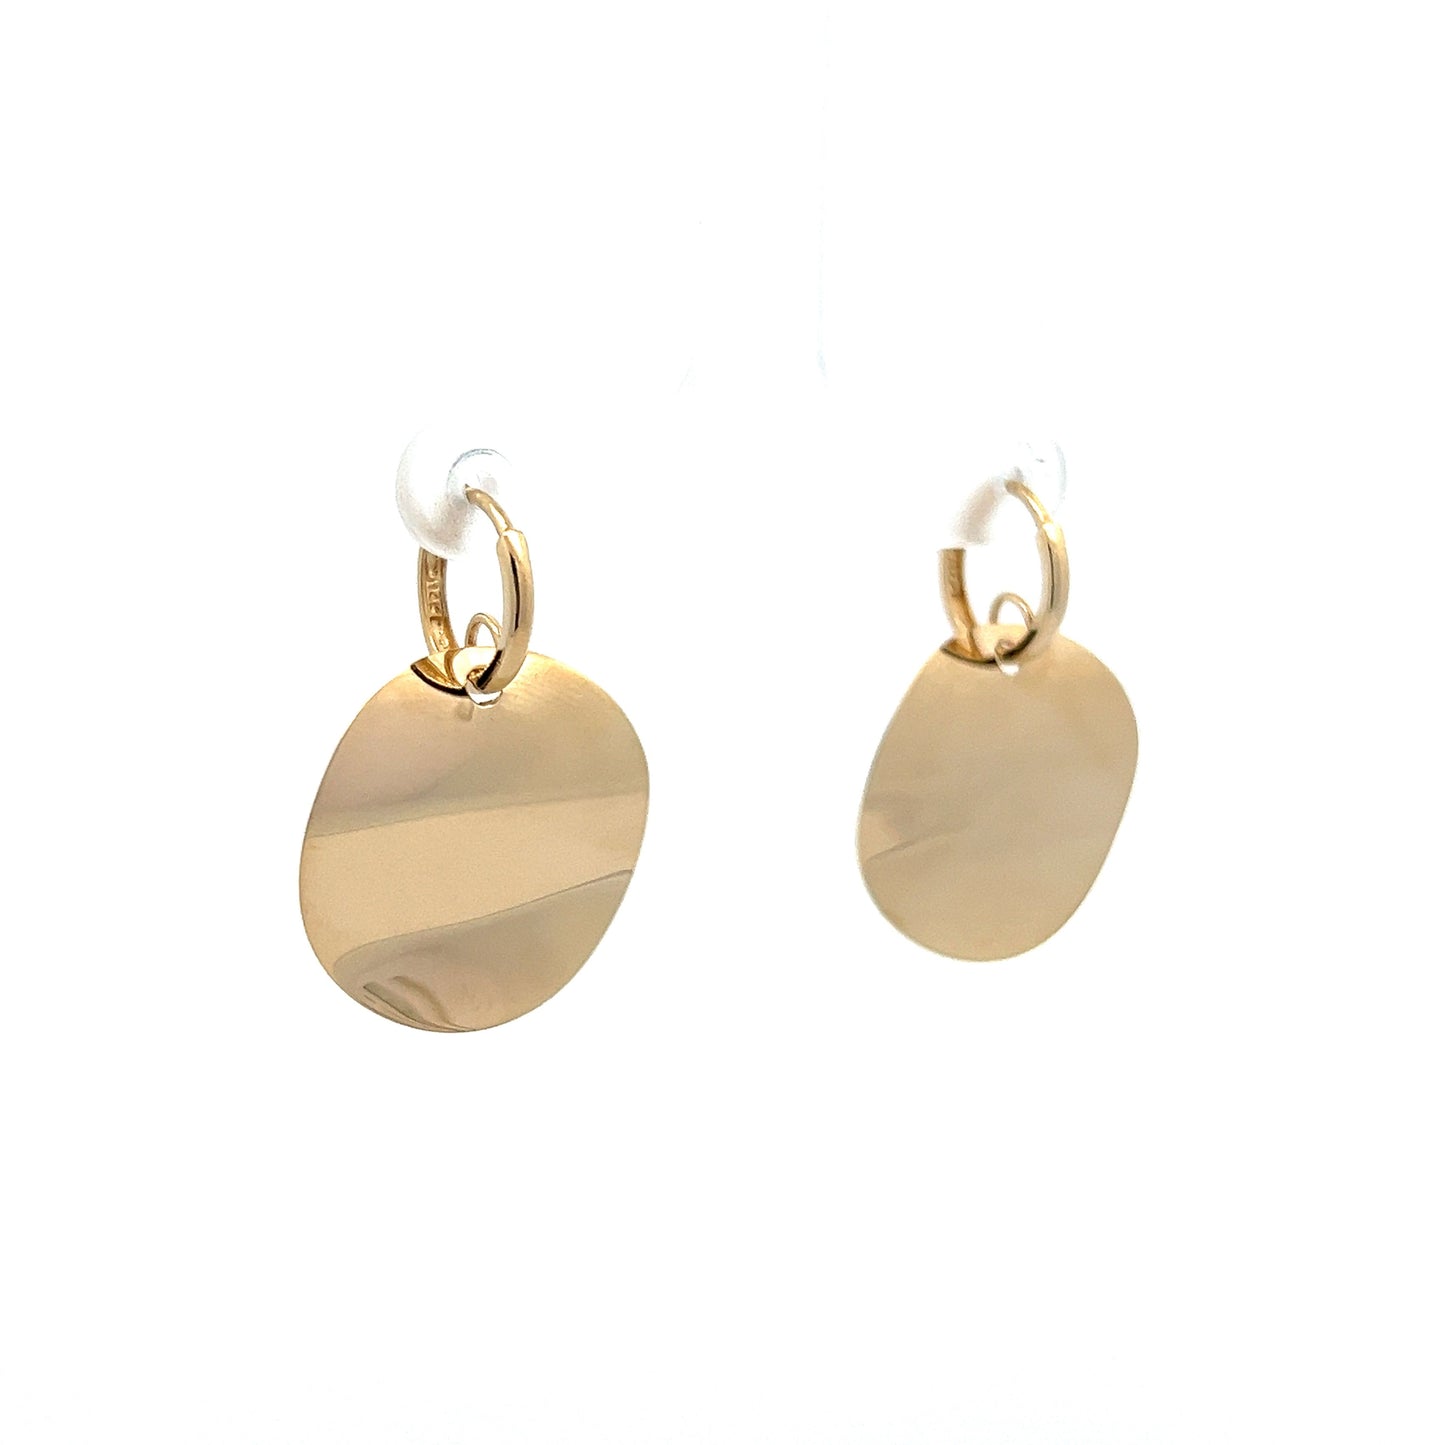 Medallion Textured Earrings in 14k Yellow Gold